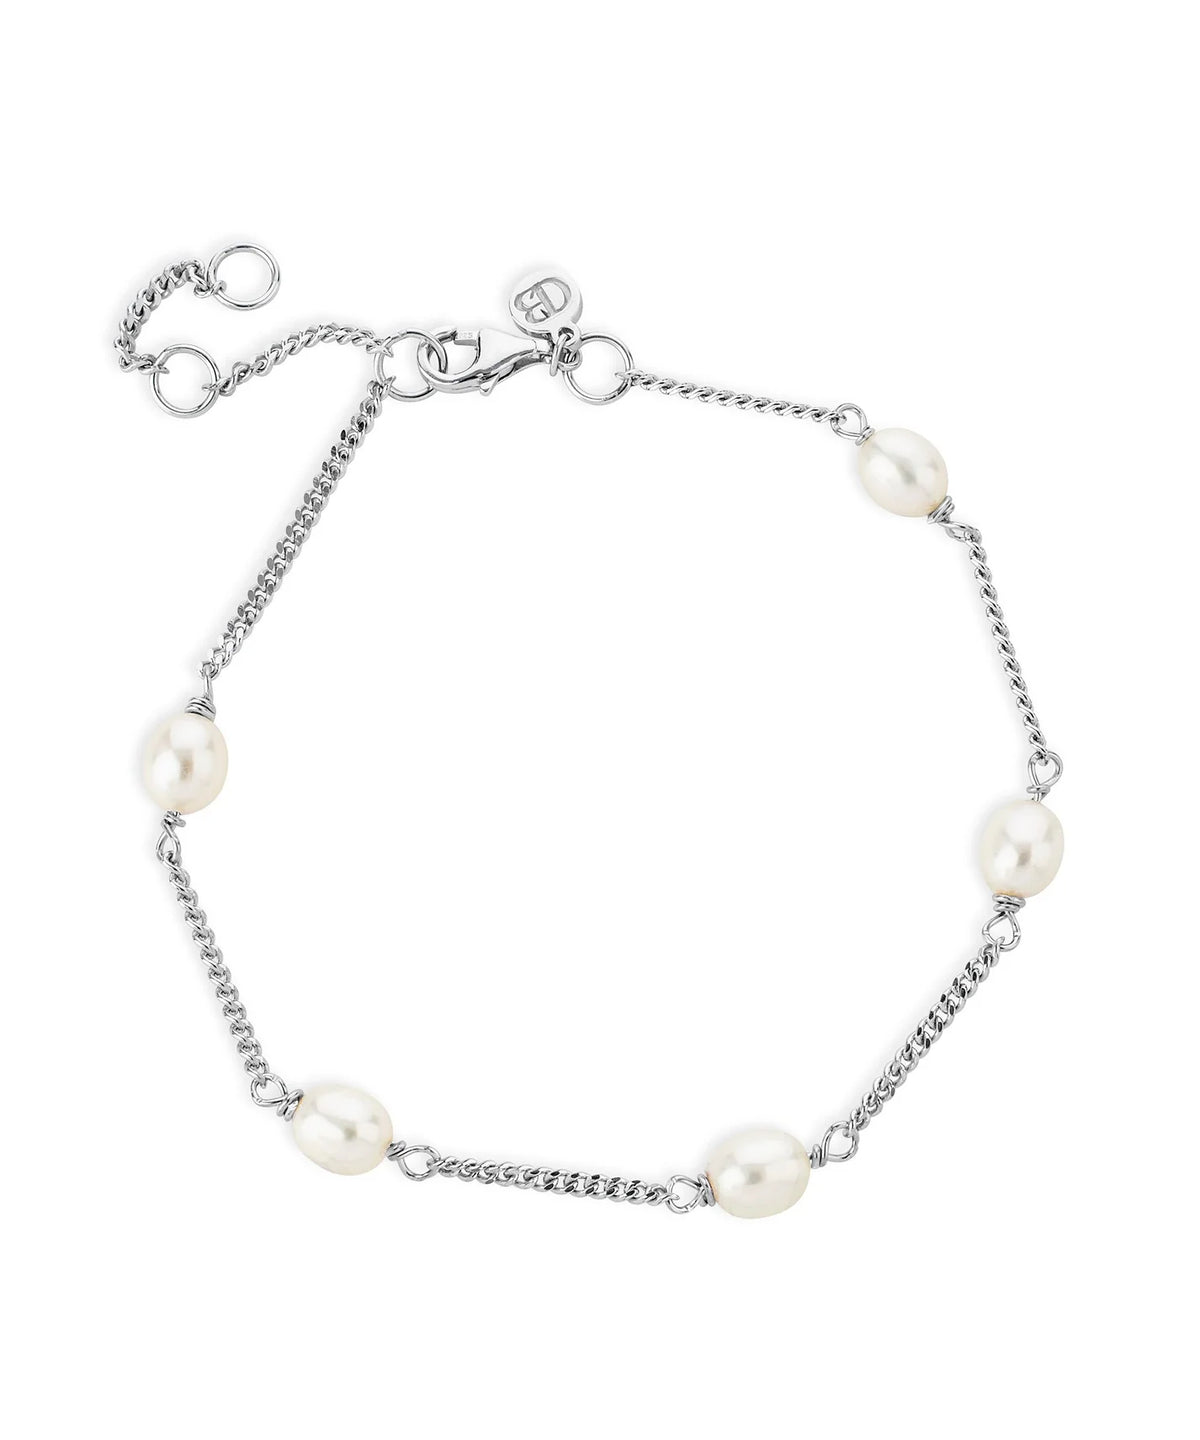 Sterling silver bracelet chain with five freshwater pearls evenly spaced throughtout the bracelet